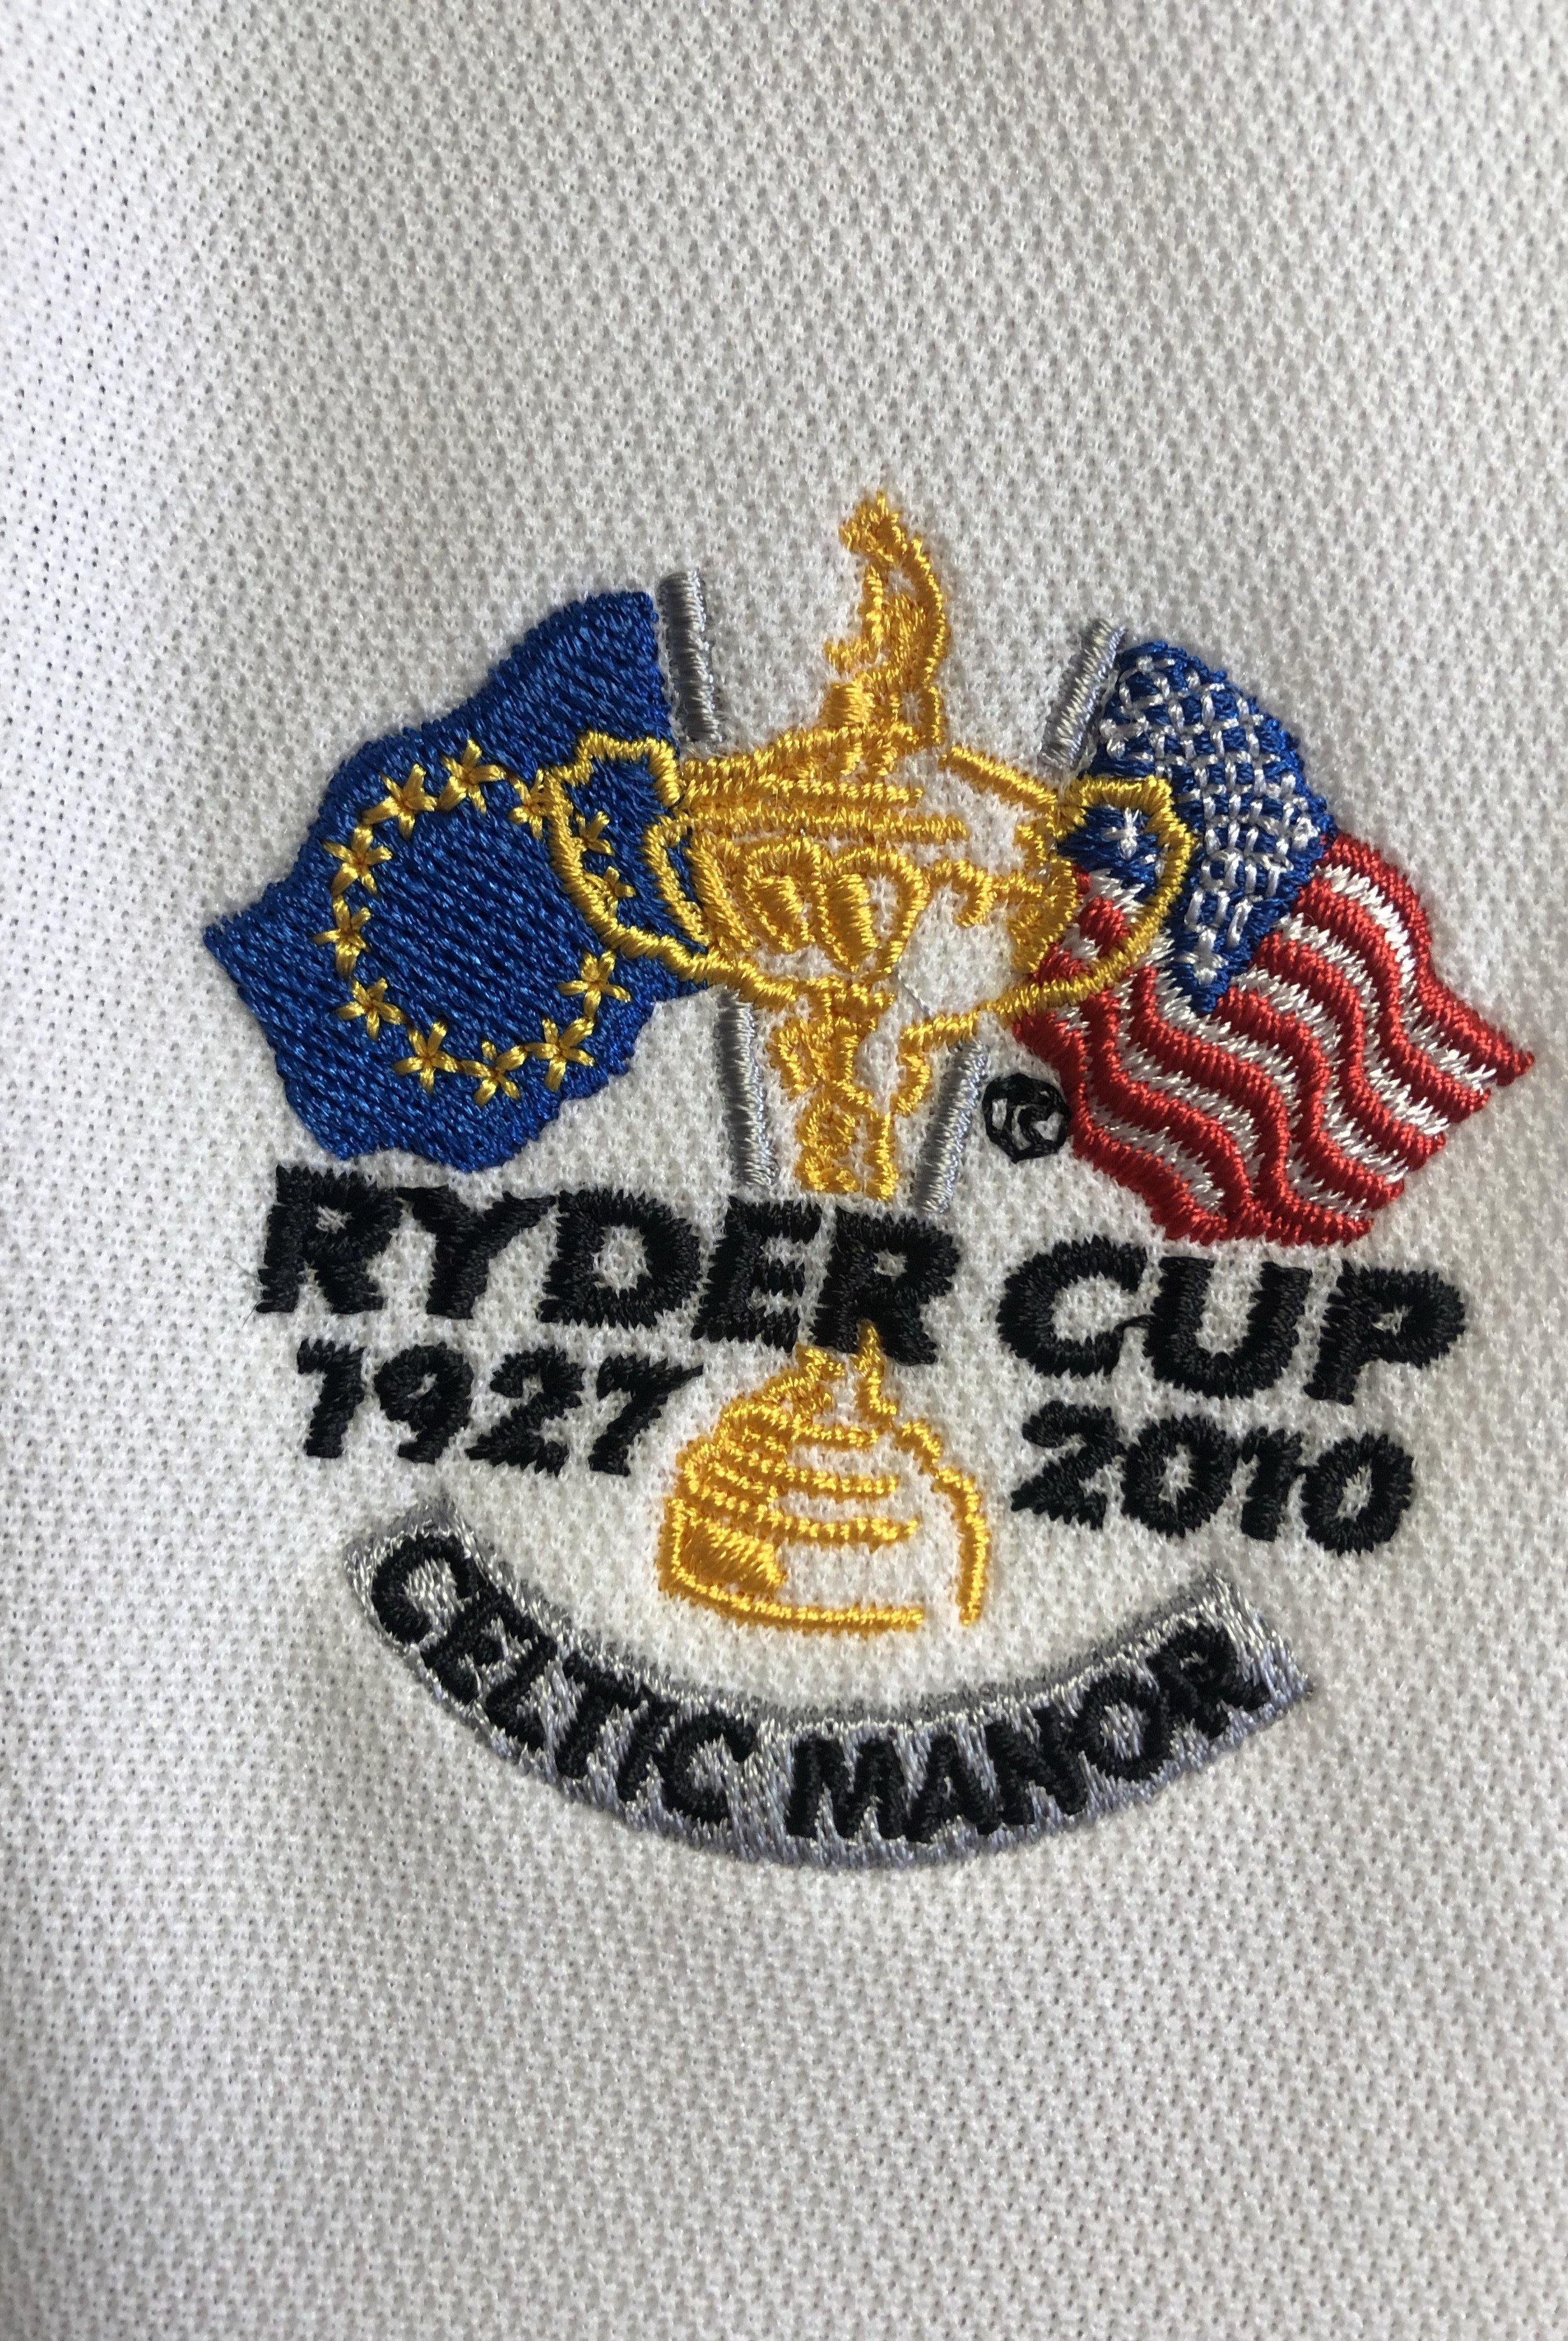 Ryder Cup 2010 Celtic Manor Polo Shirt Mens Large - Belfast Books